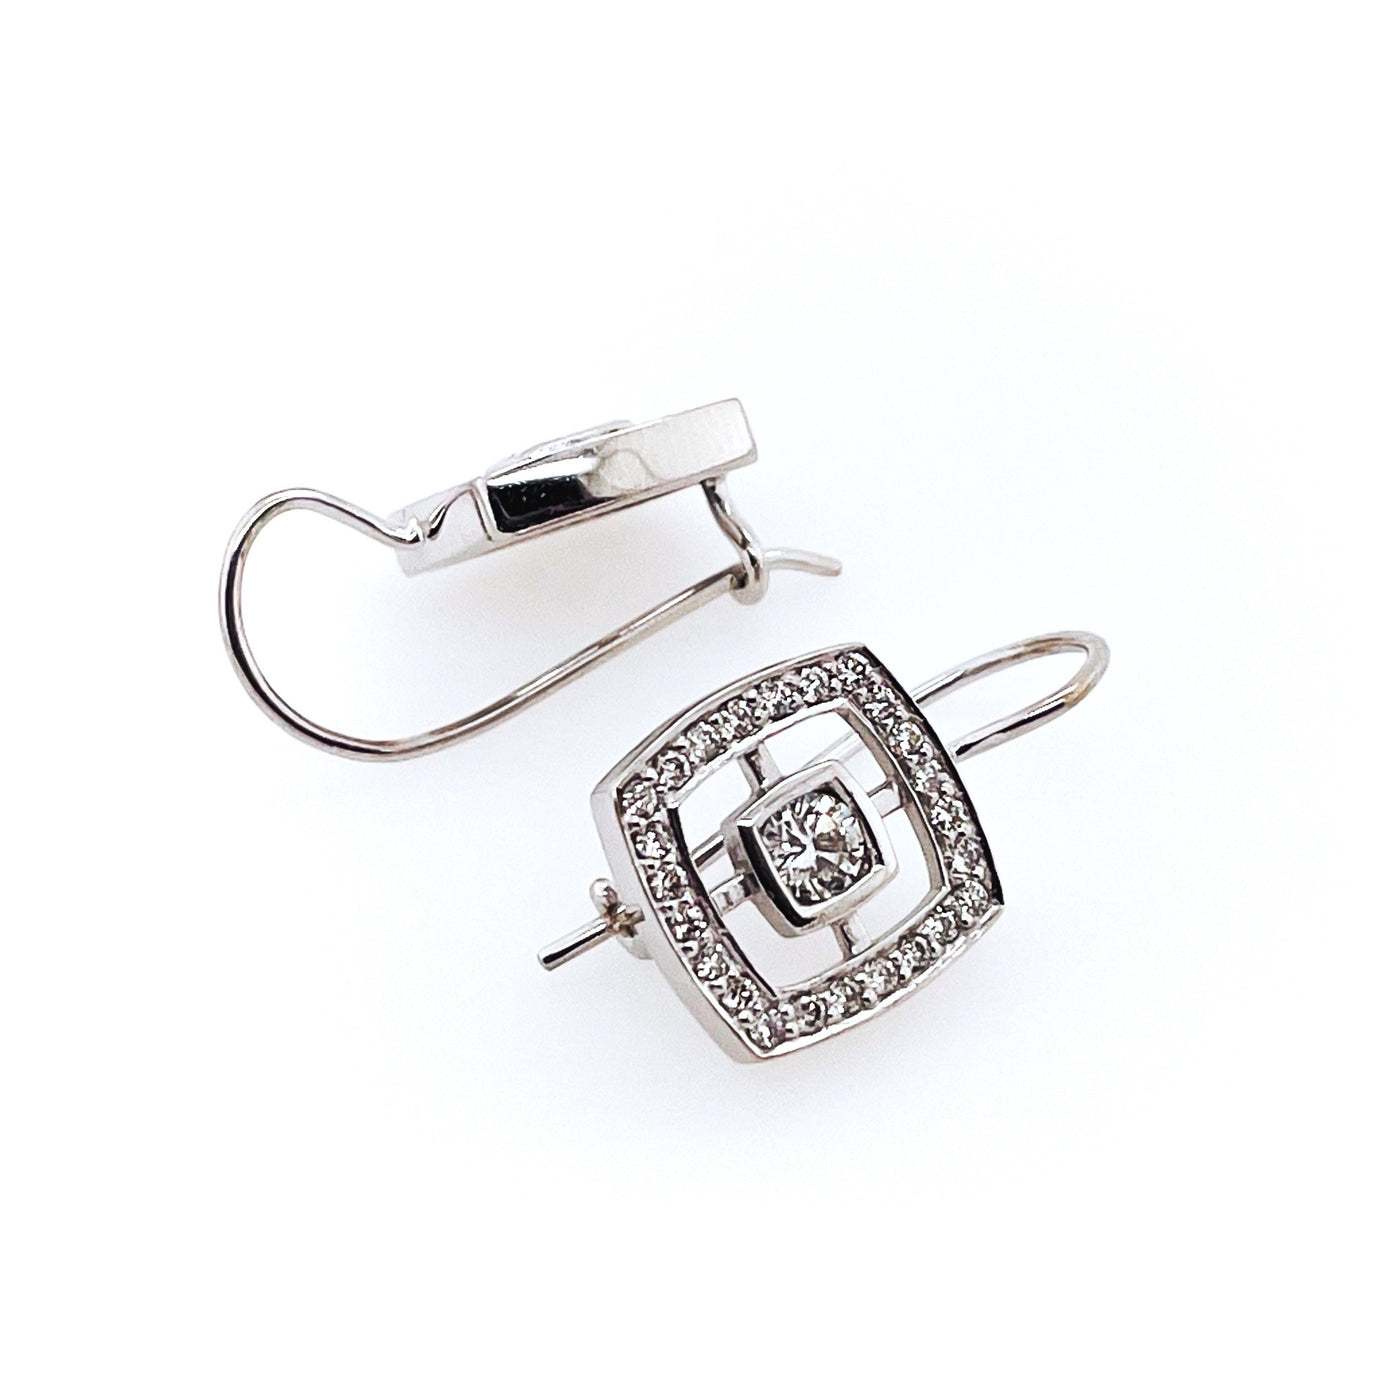 9ct White Gold and Diamond Drop Earrings - SOLD OUT